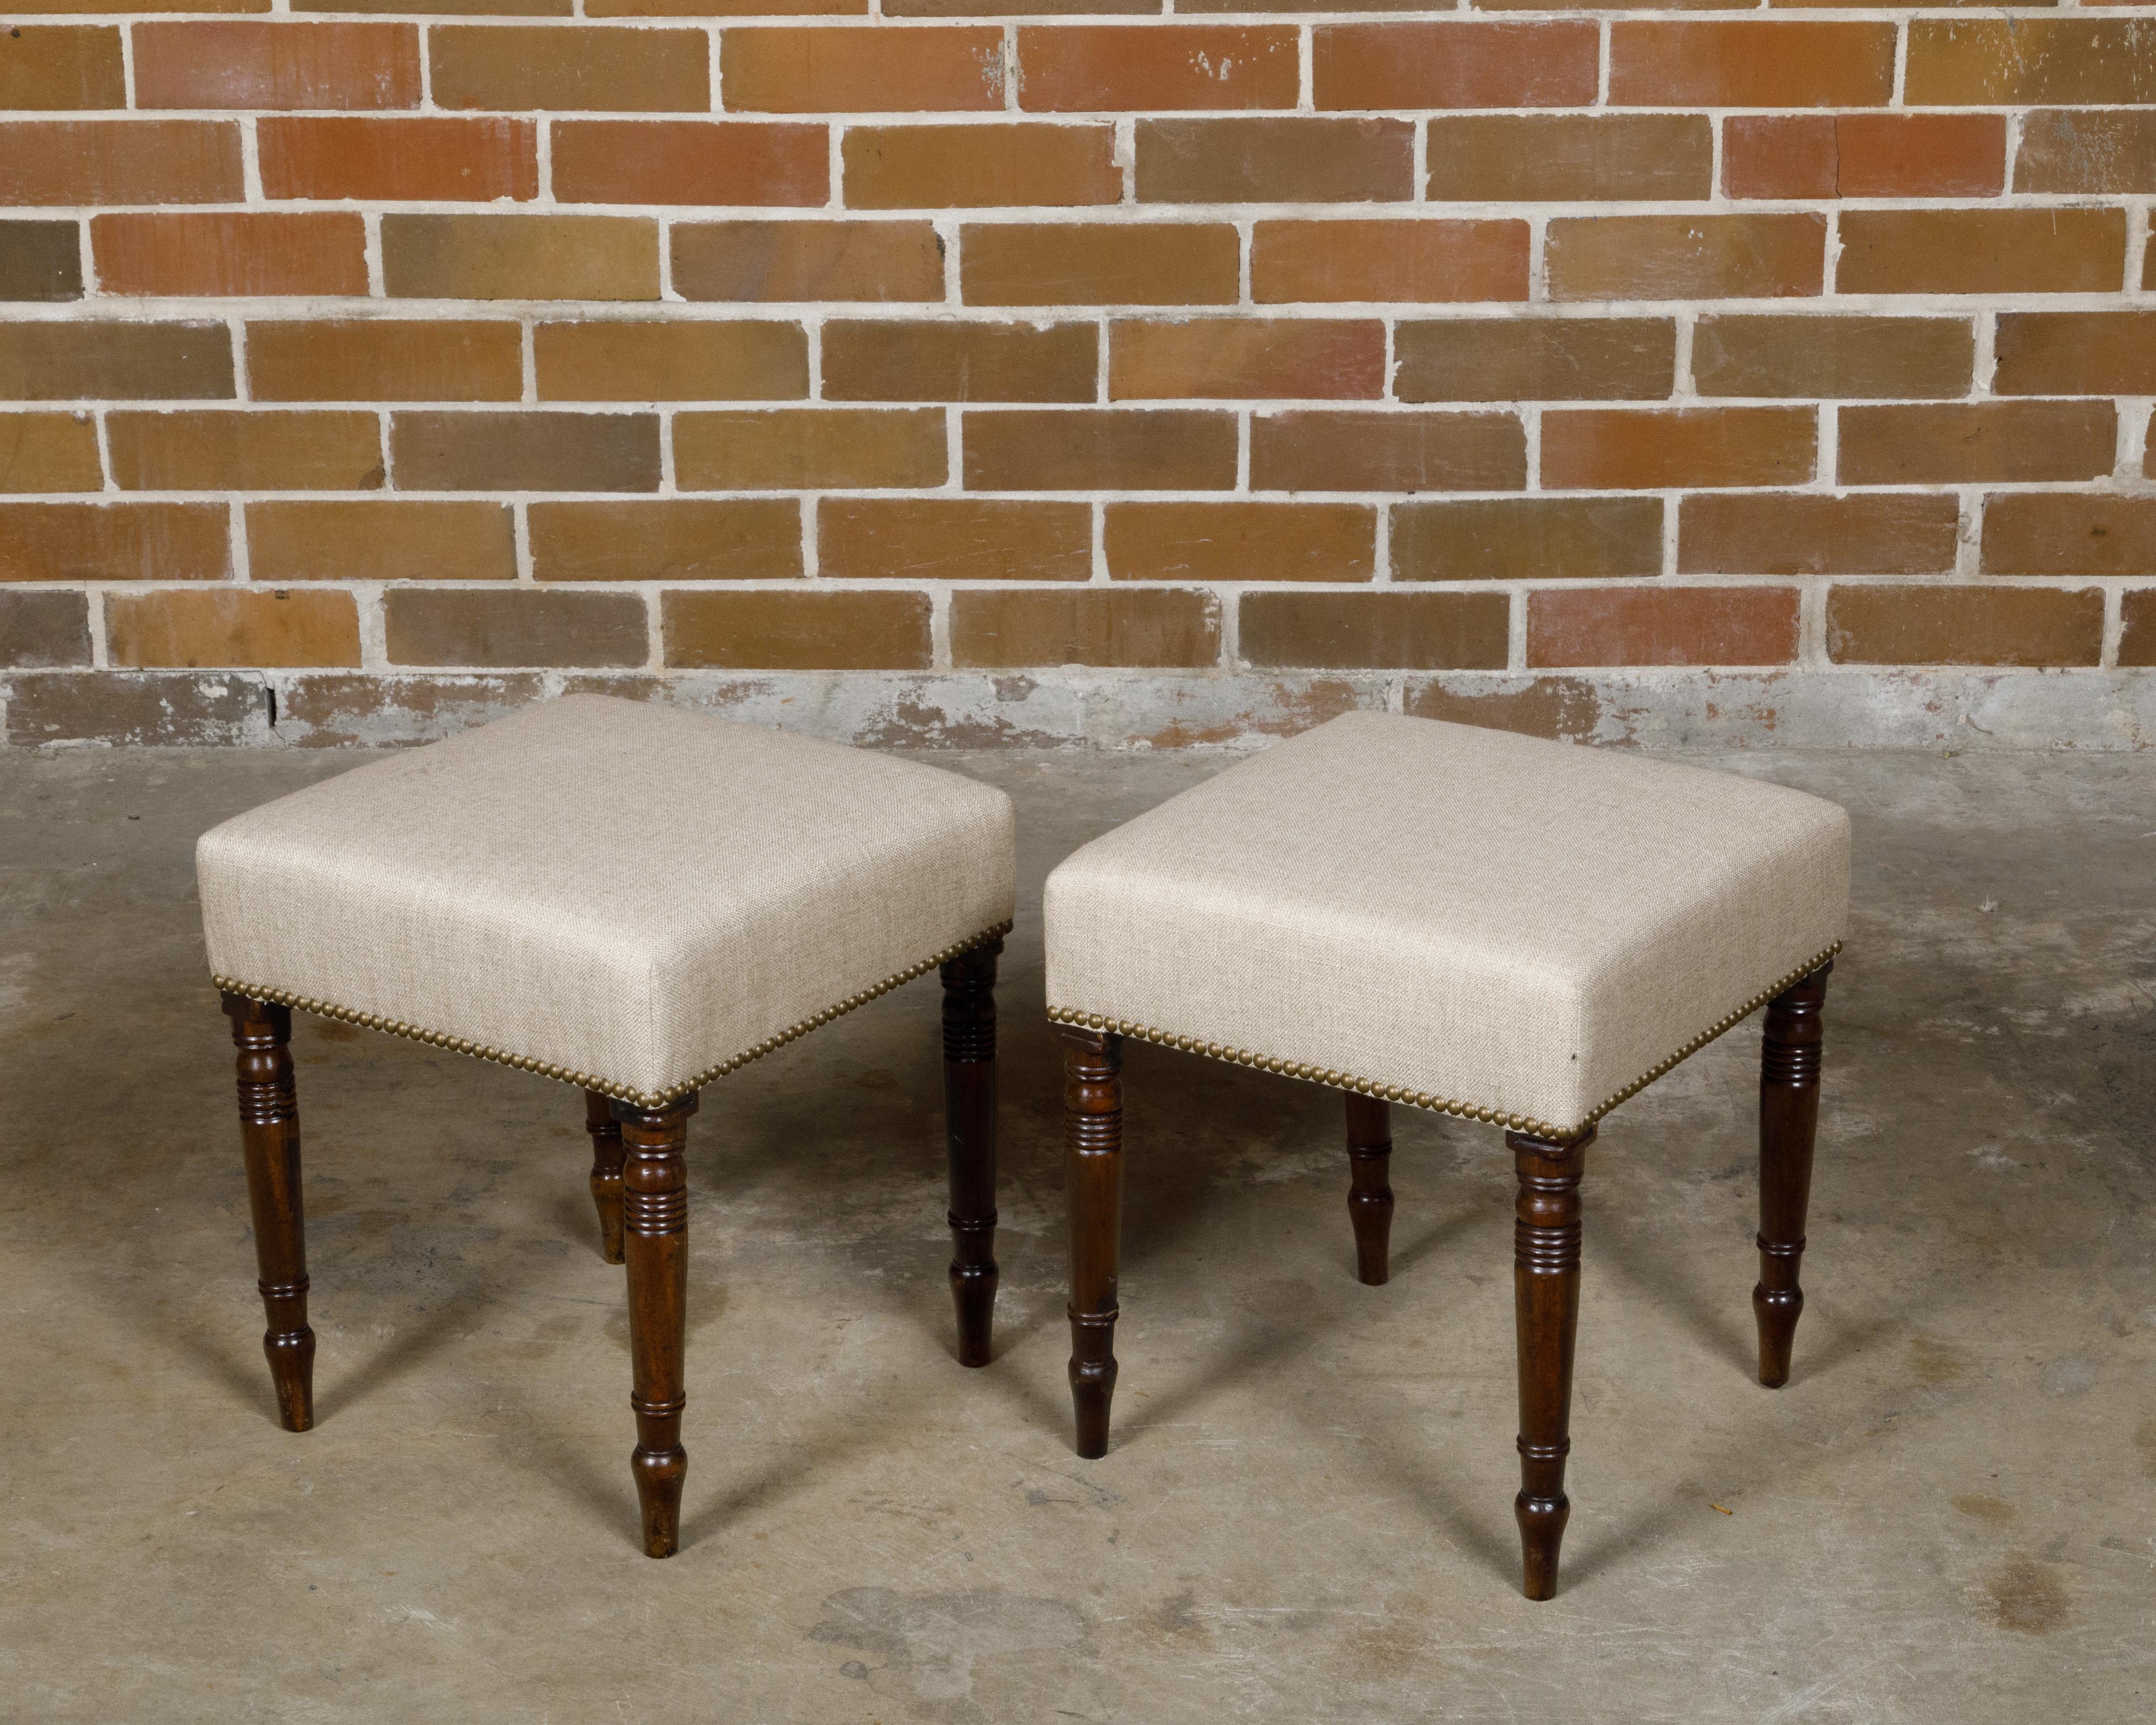 Pair of English Regency 19th Century Mahogany Stools with Turned Spindle Legs For Sale 2